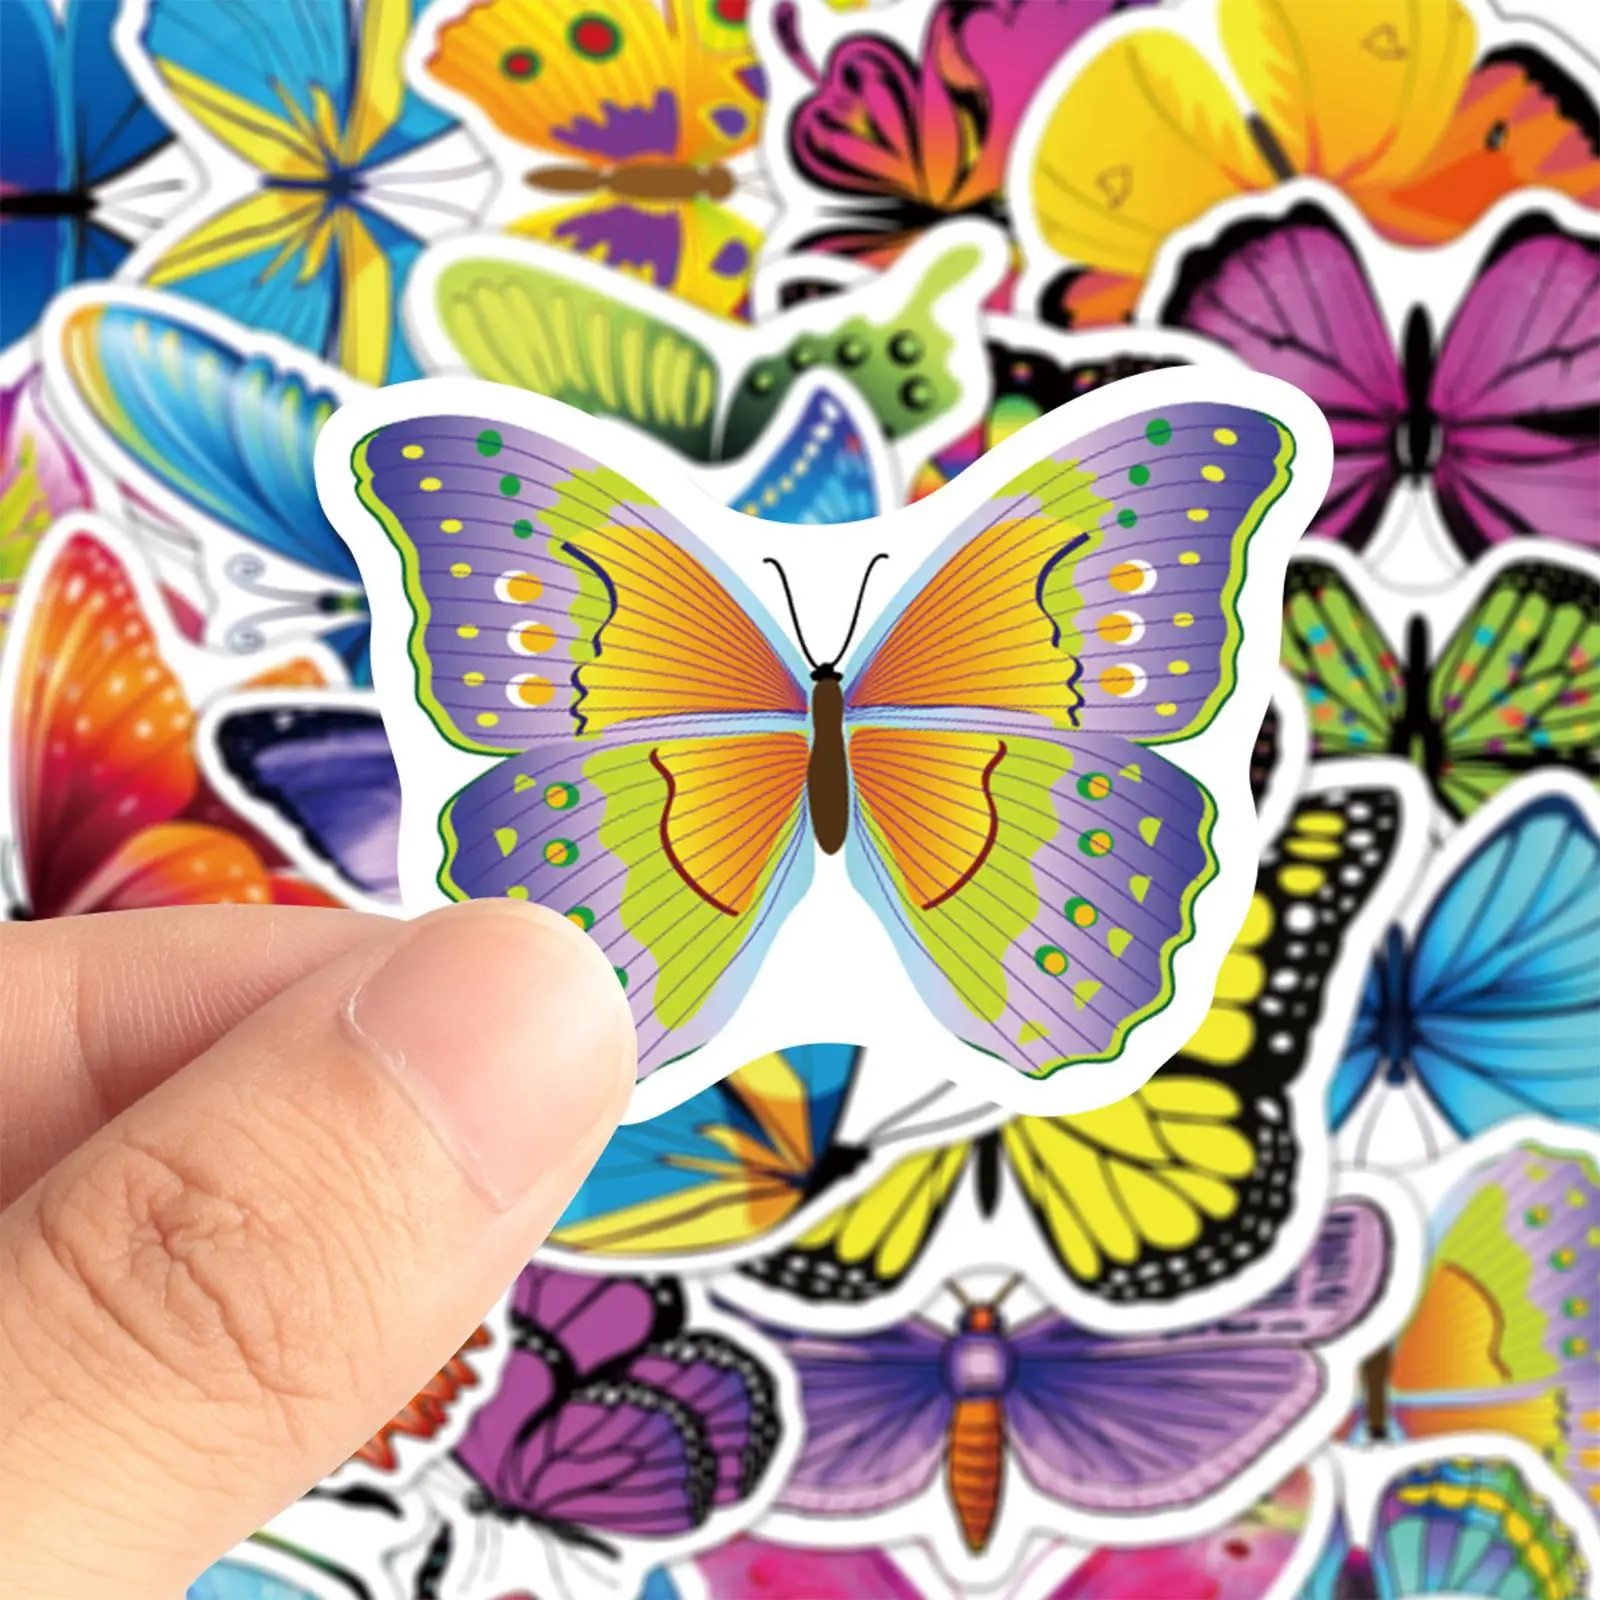 50 Pieces Small Colorful Butterfly Stickers Decorative Waterproof for Scrapbook Laptop Daily Planner Luggage Bike